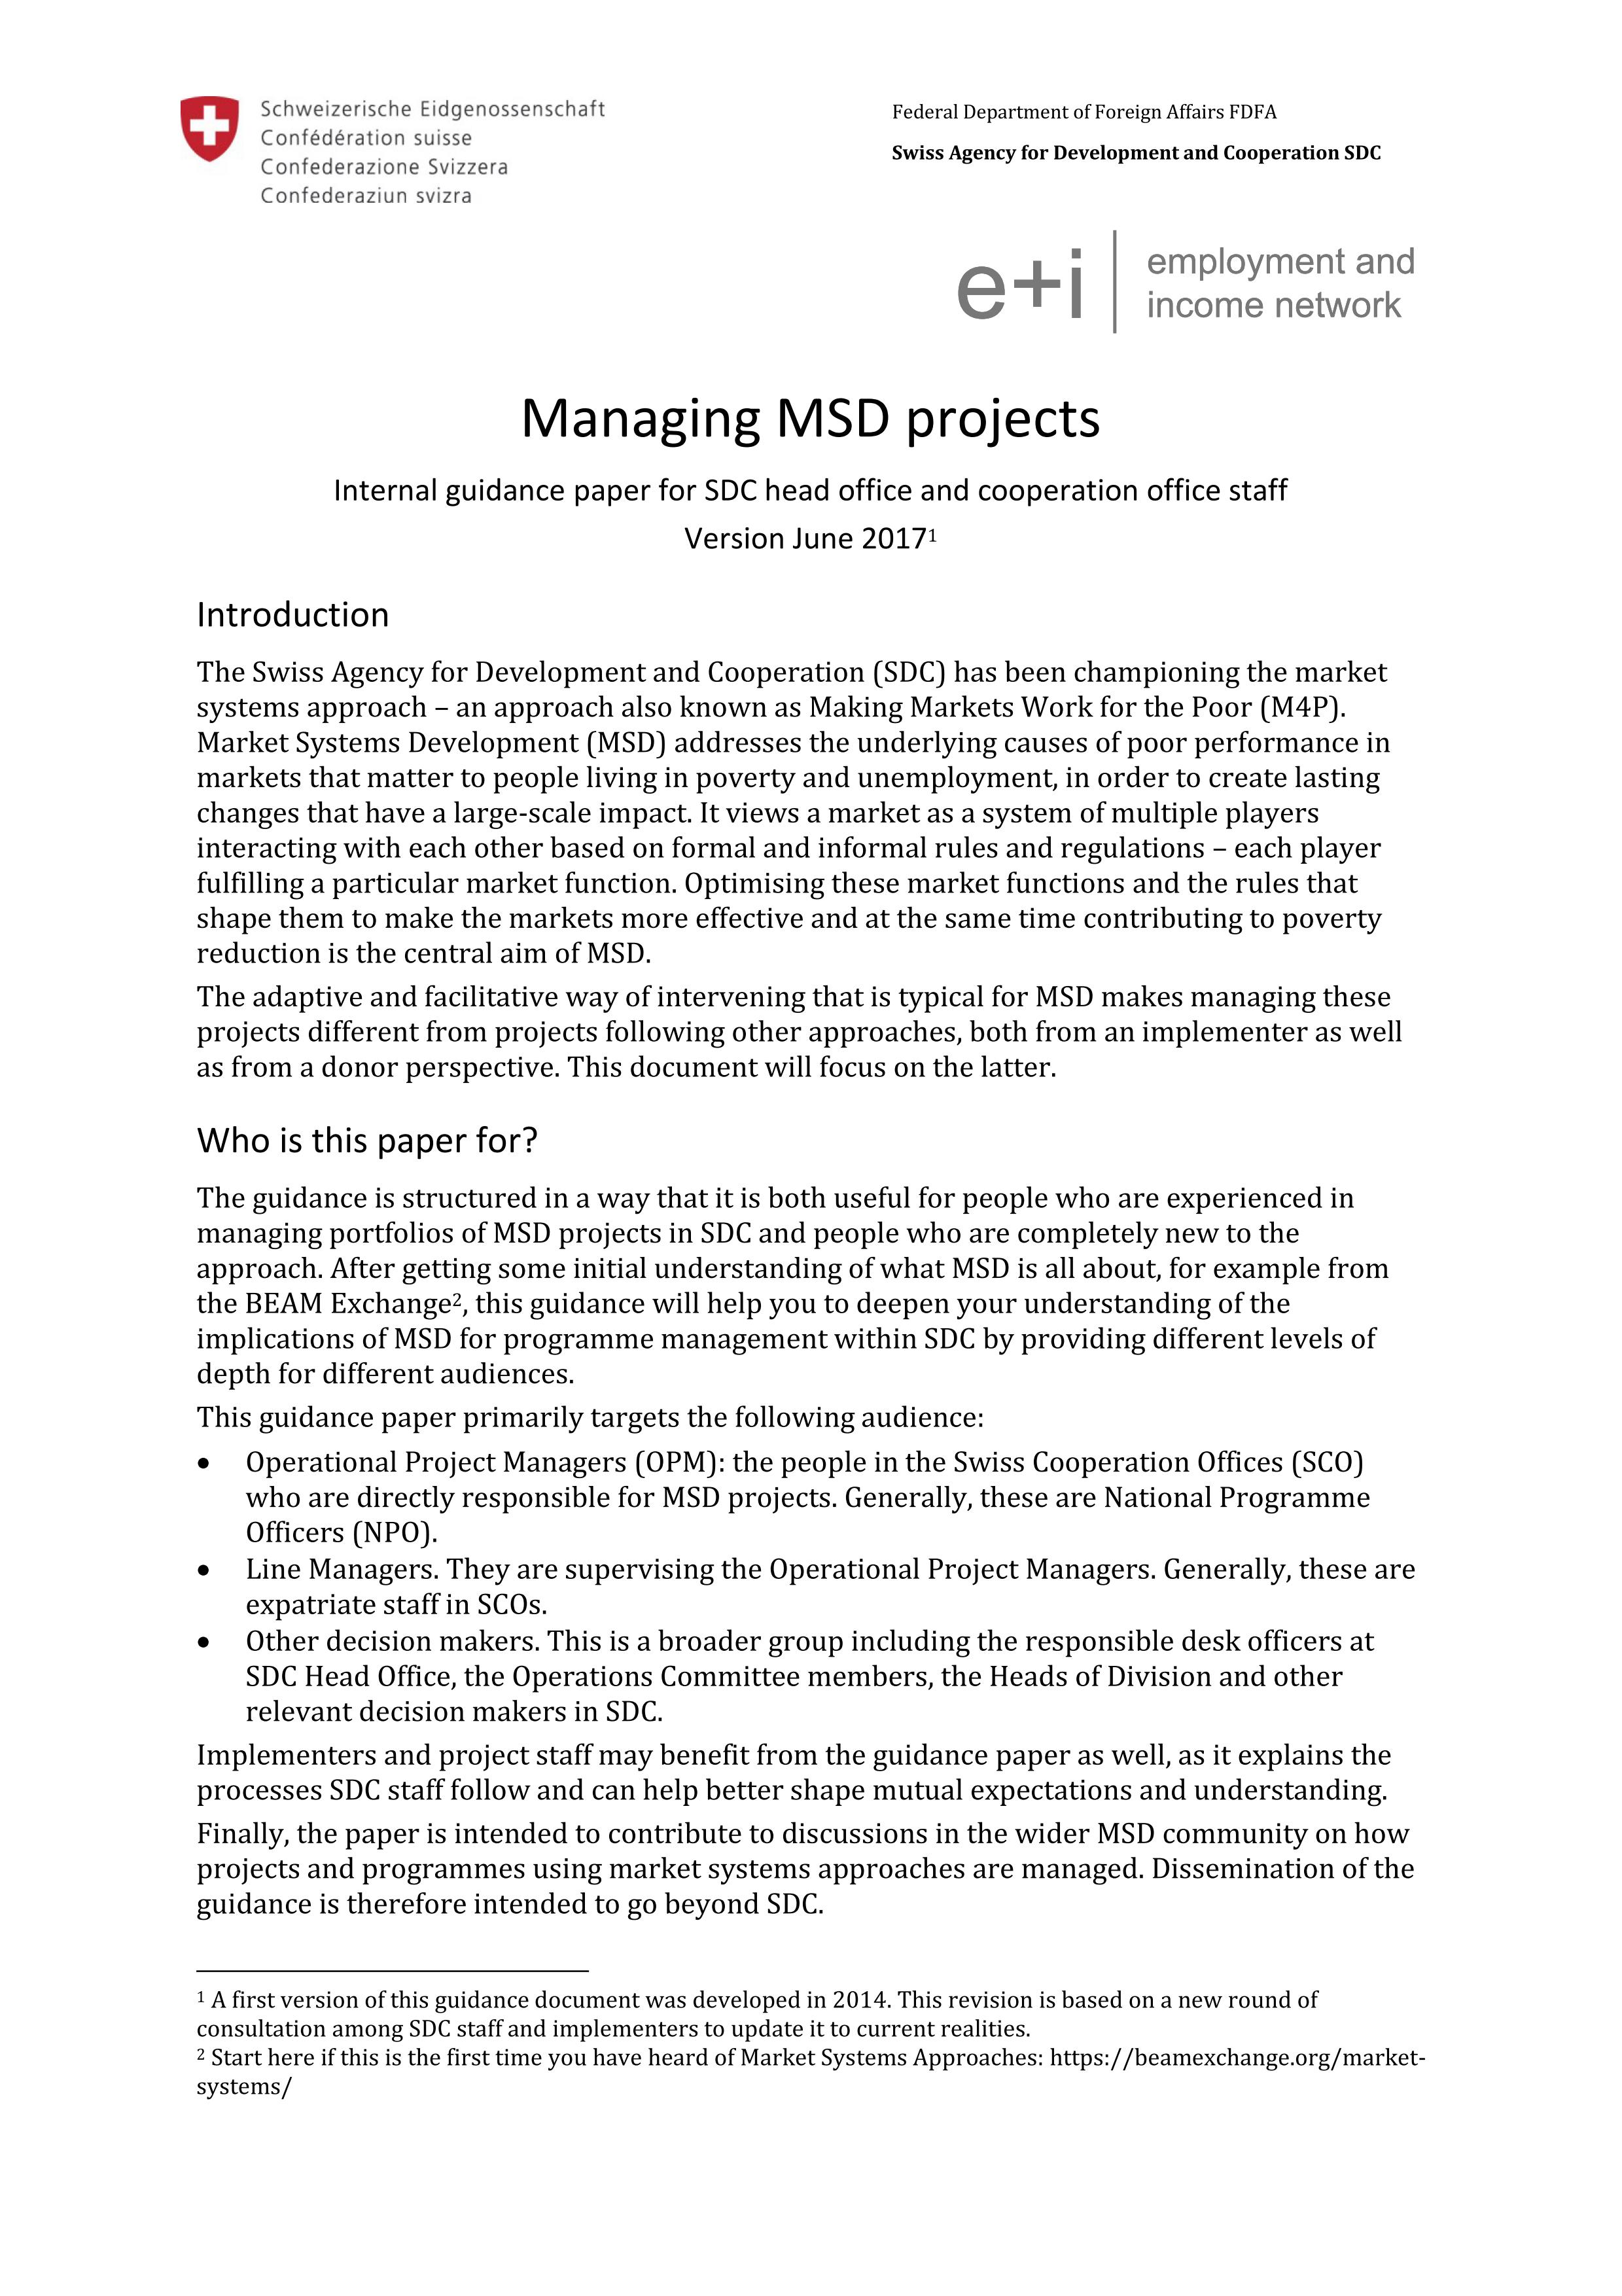 SDC MSD Guidance Document revised 2017-06